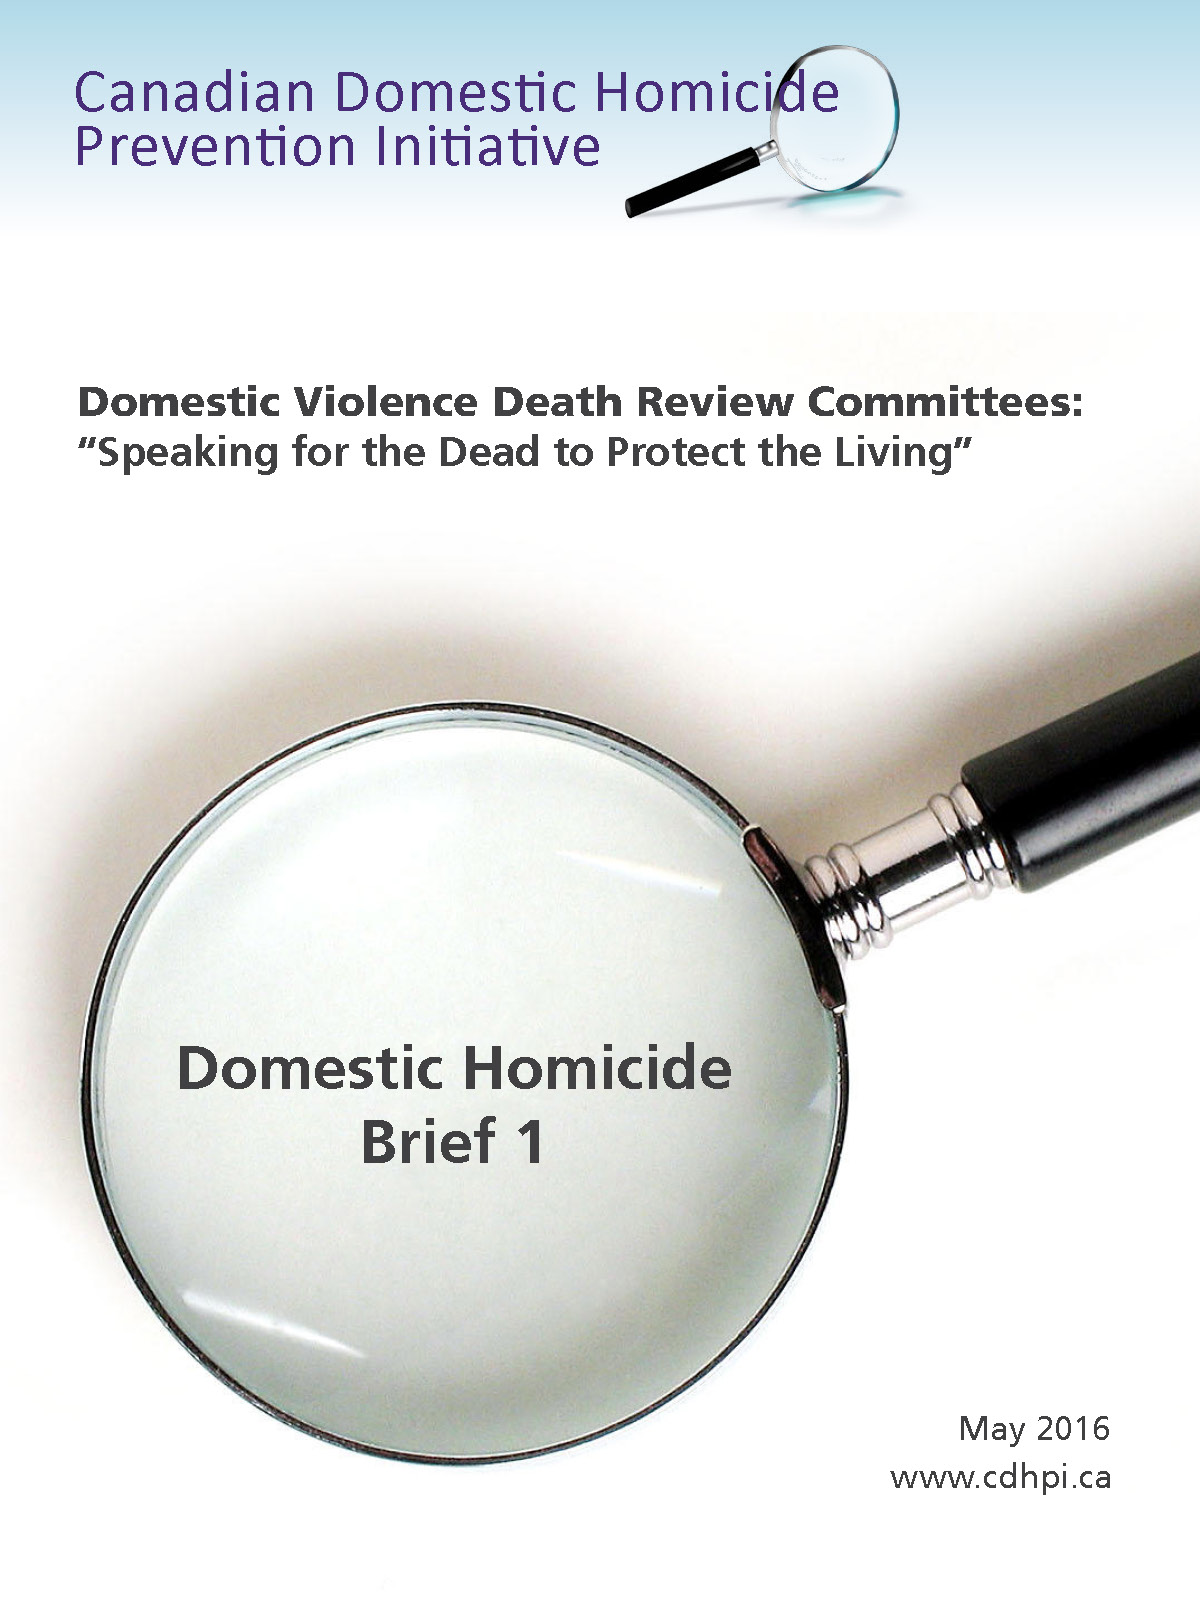 CDHPIVP Domestic Homicide Brief #1: Domestic Violence Death Review  Committees: Speaking for the Dead to Protect the Living